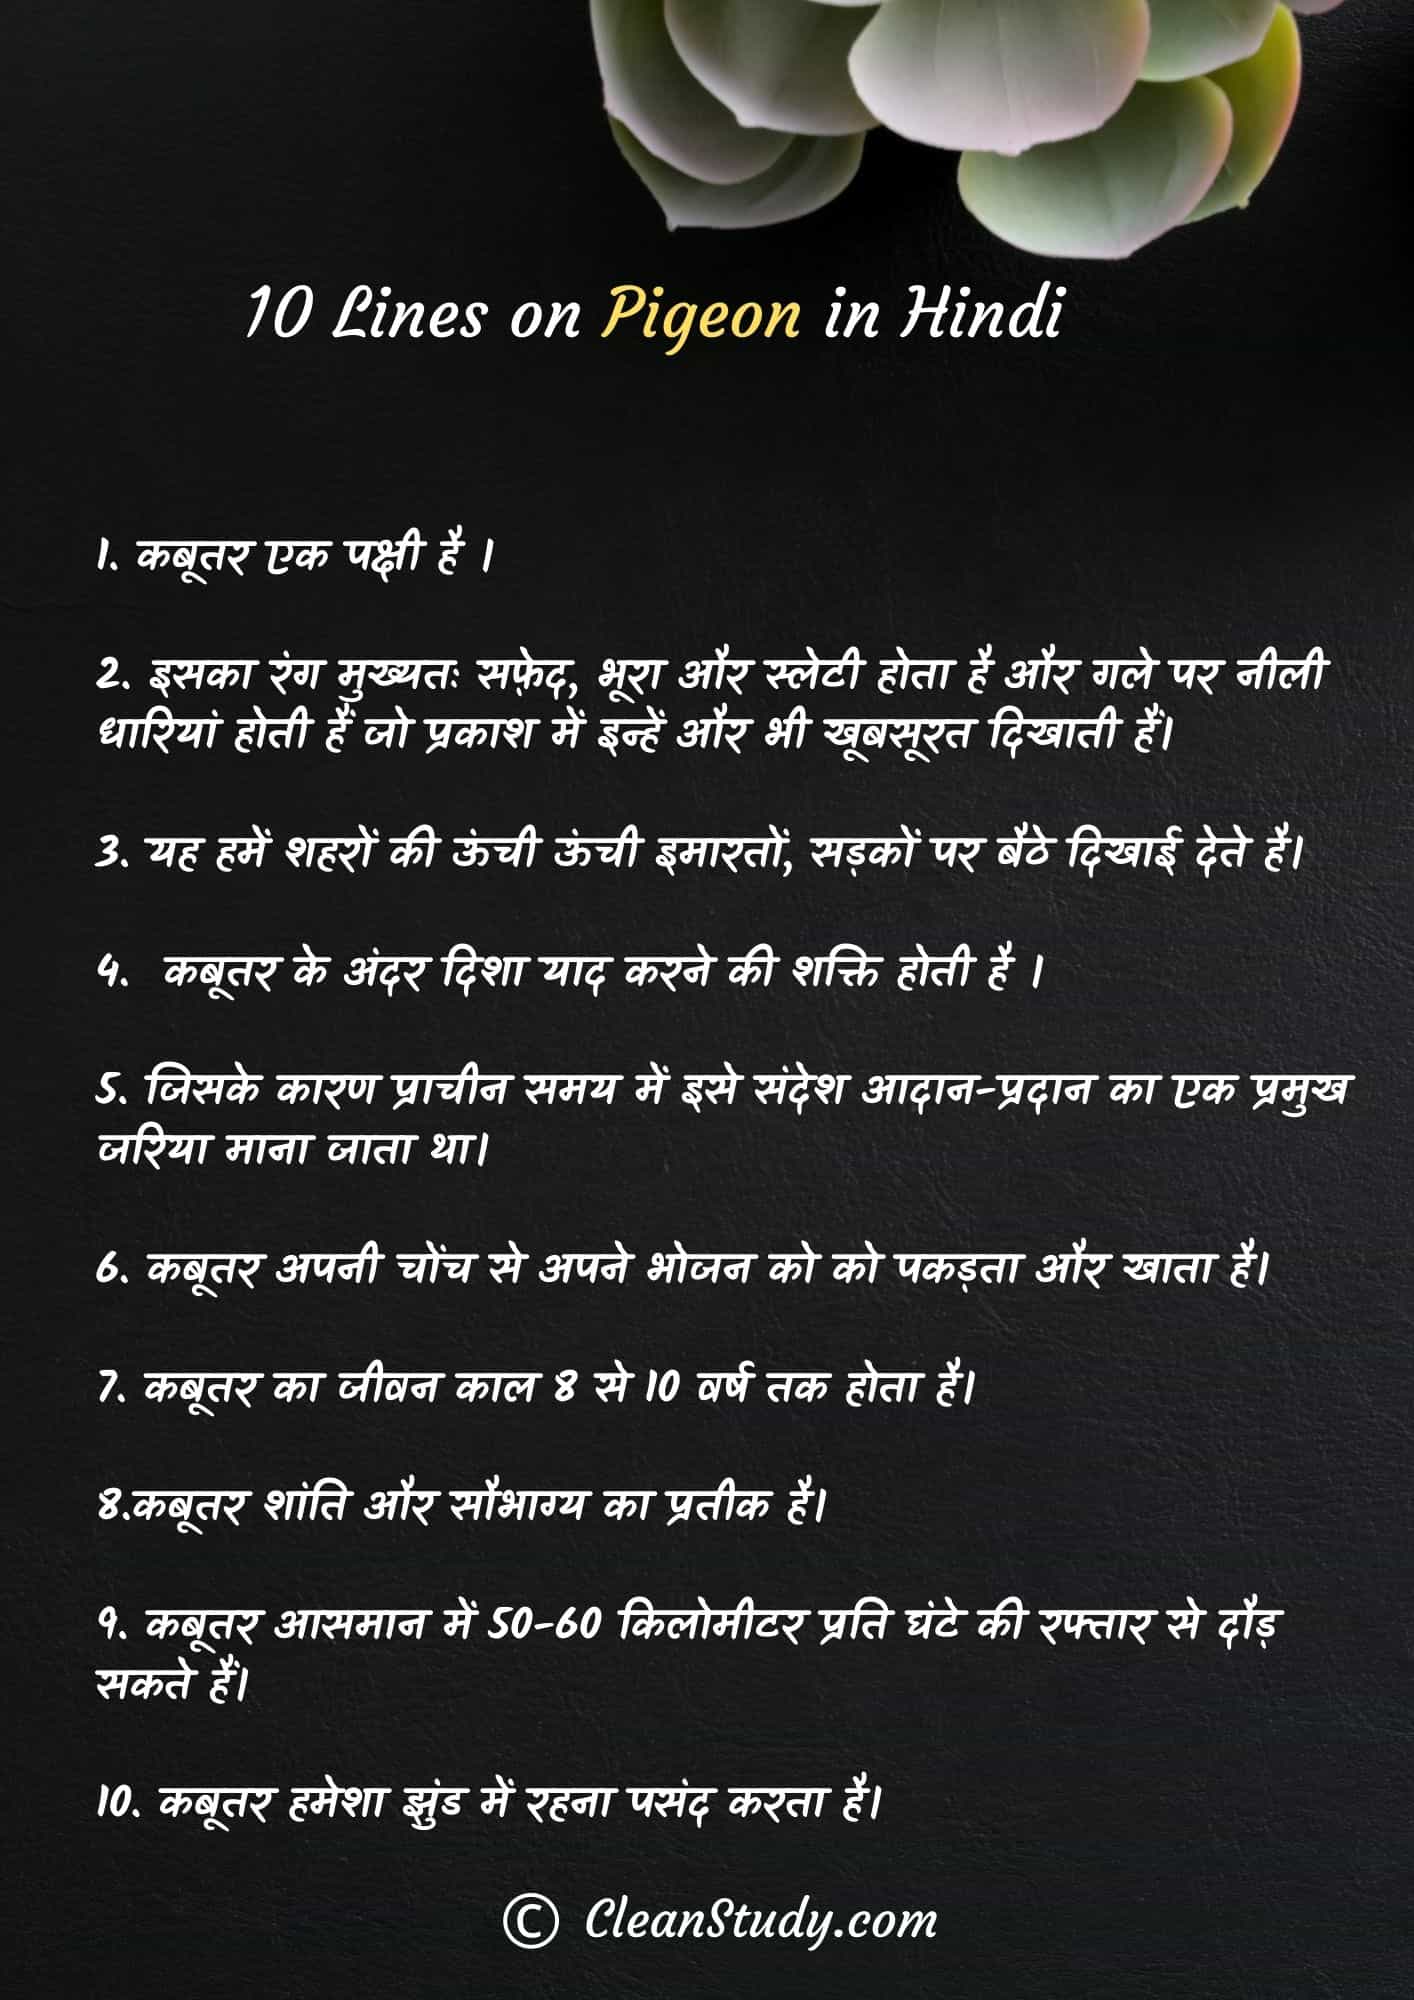 10 Lines on Pigeon in Hindi